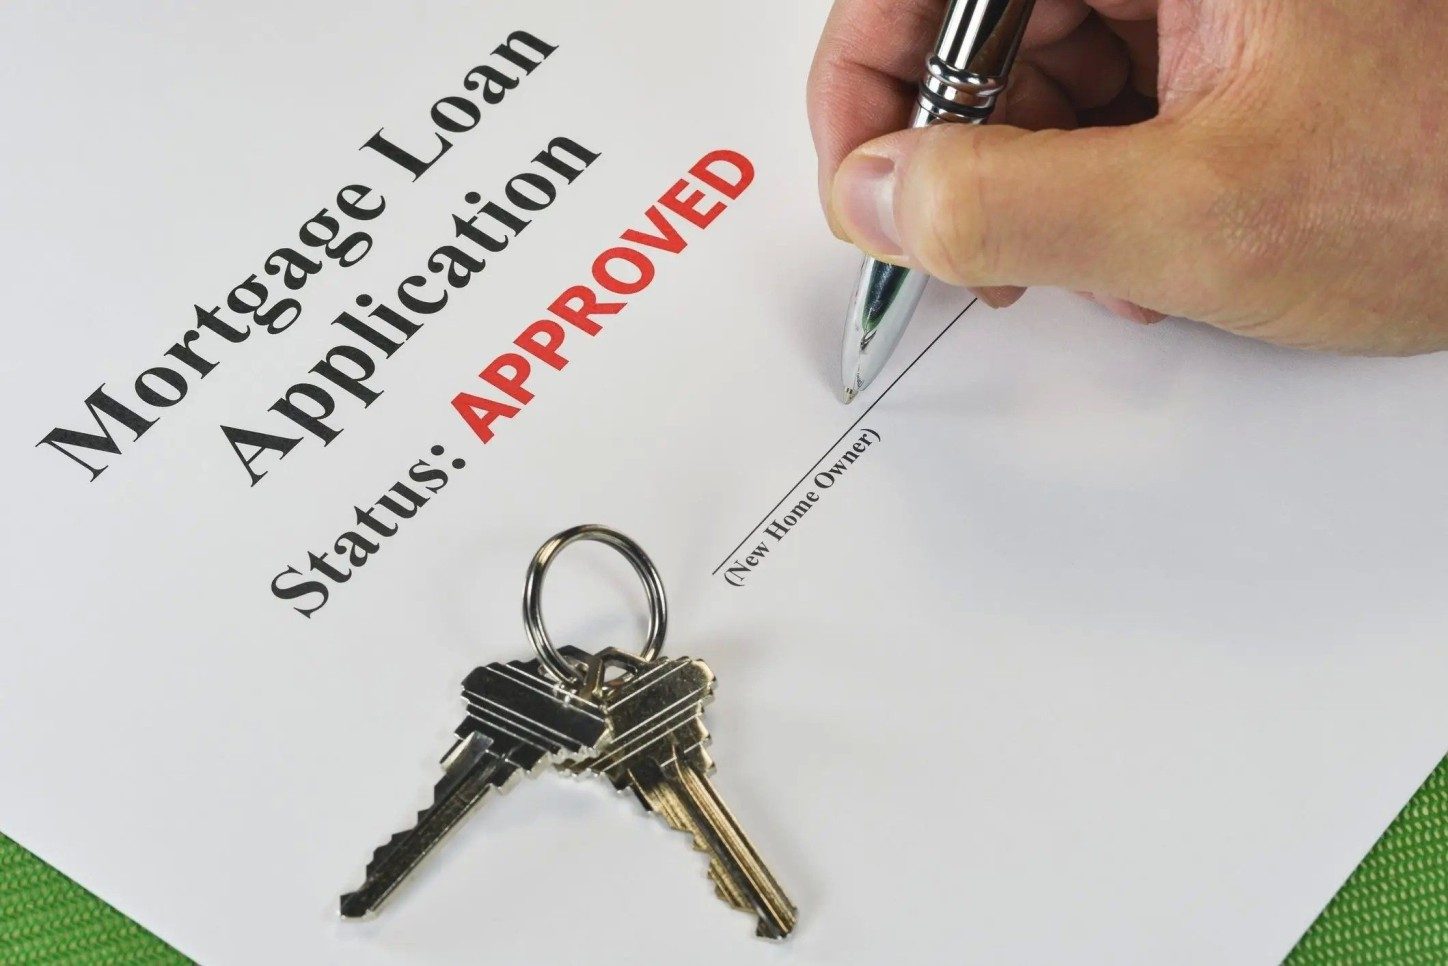 What Do You Need to Get Approved for a Bad Credit Mortgage?